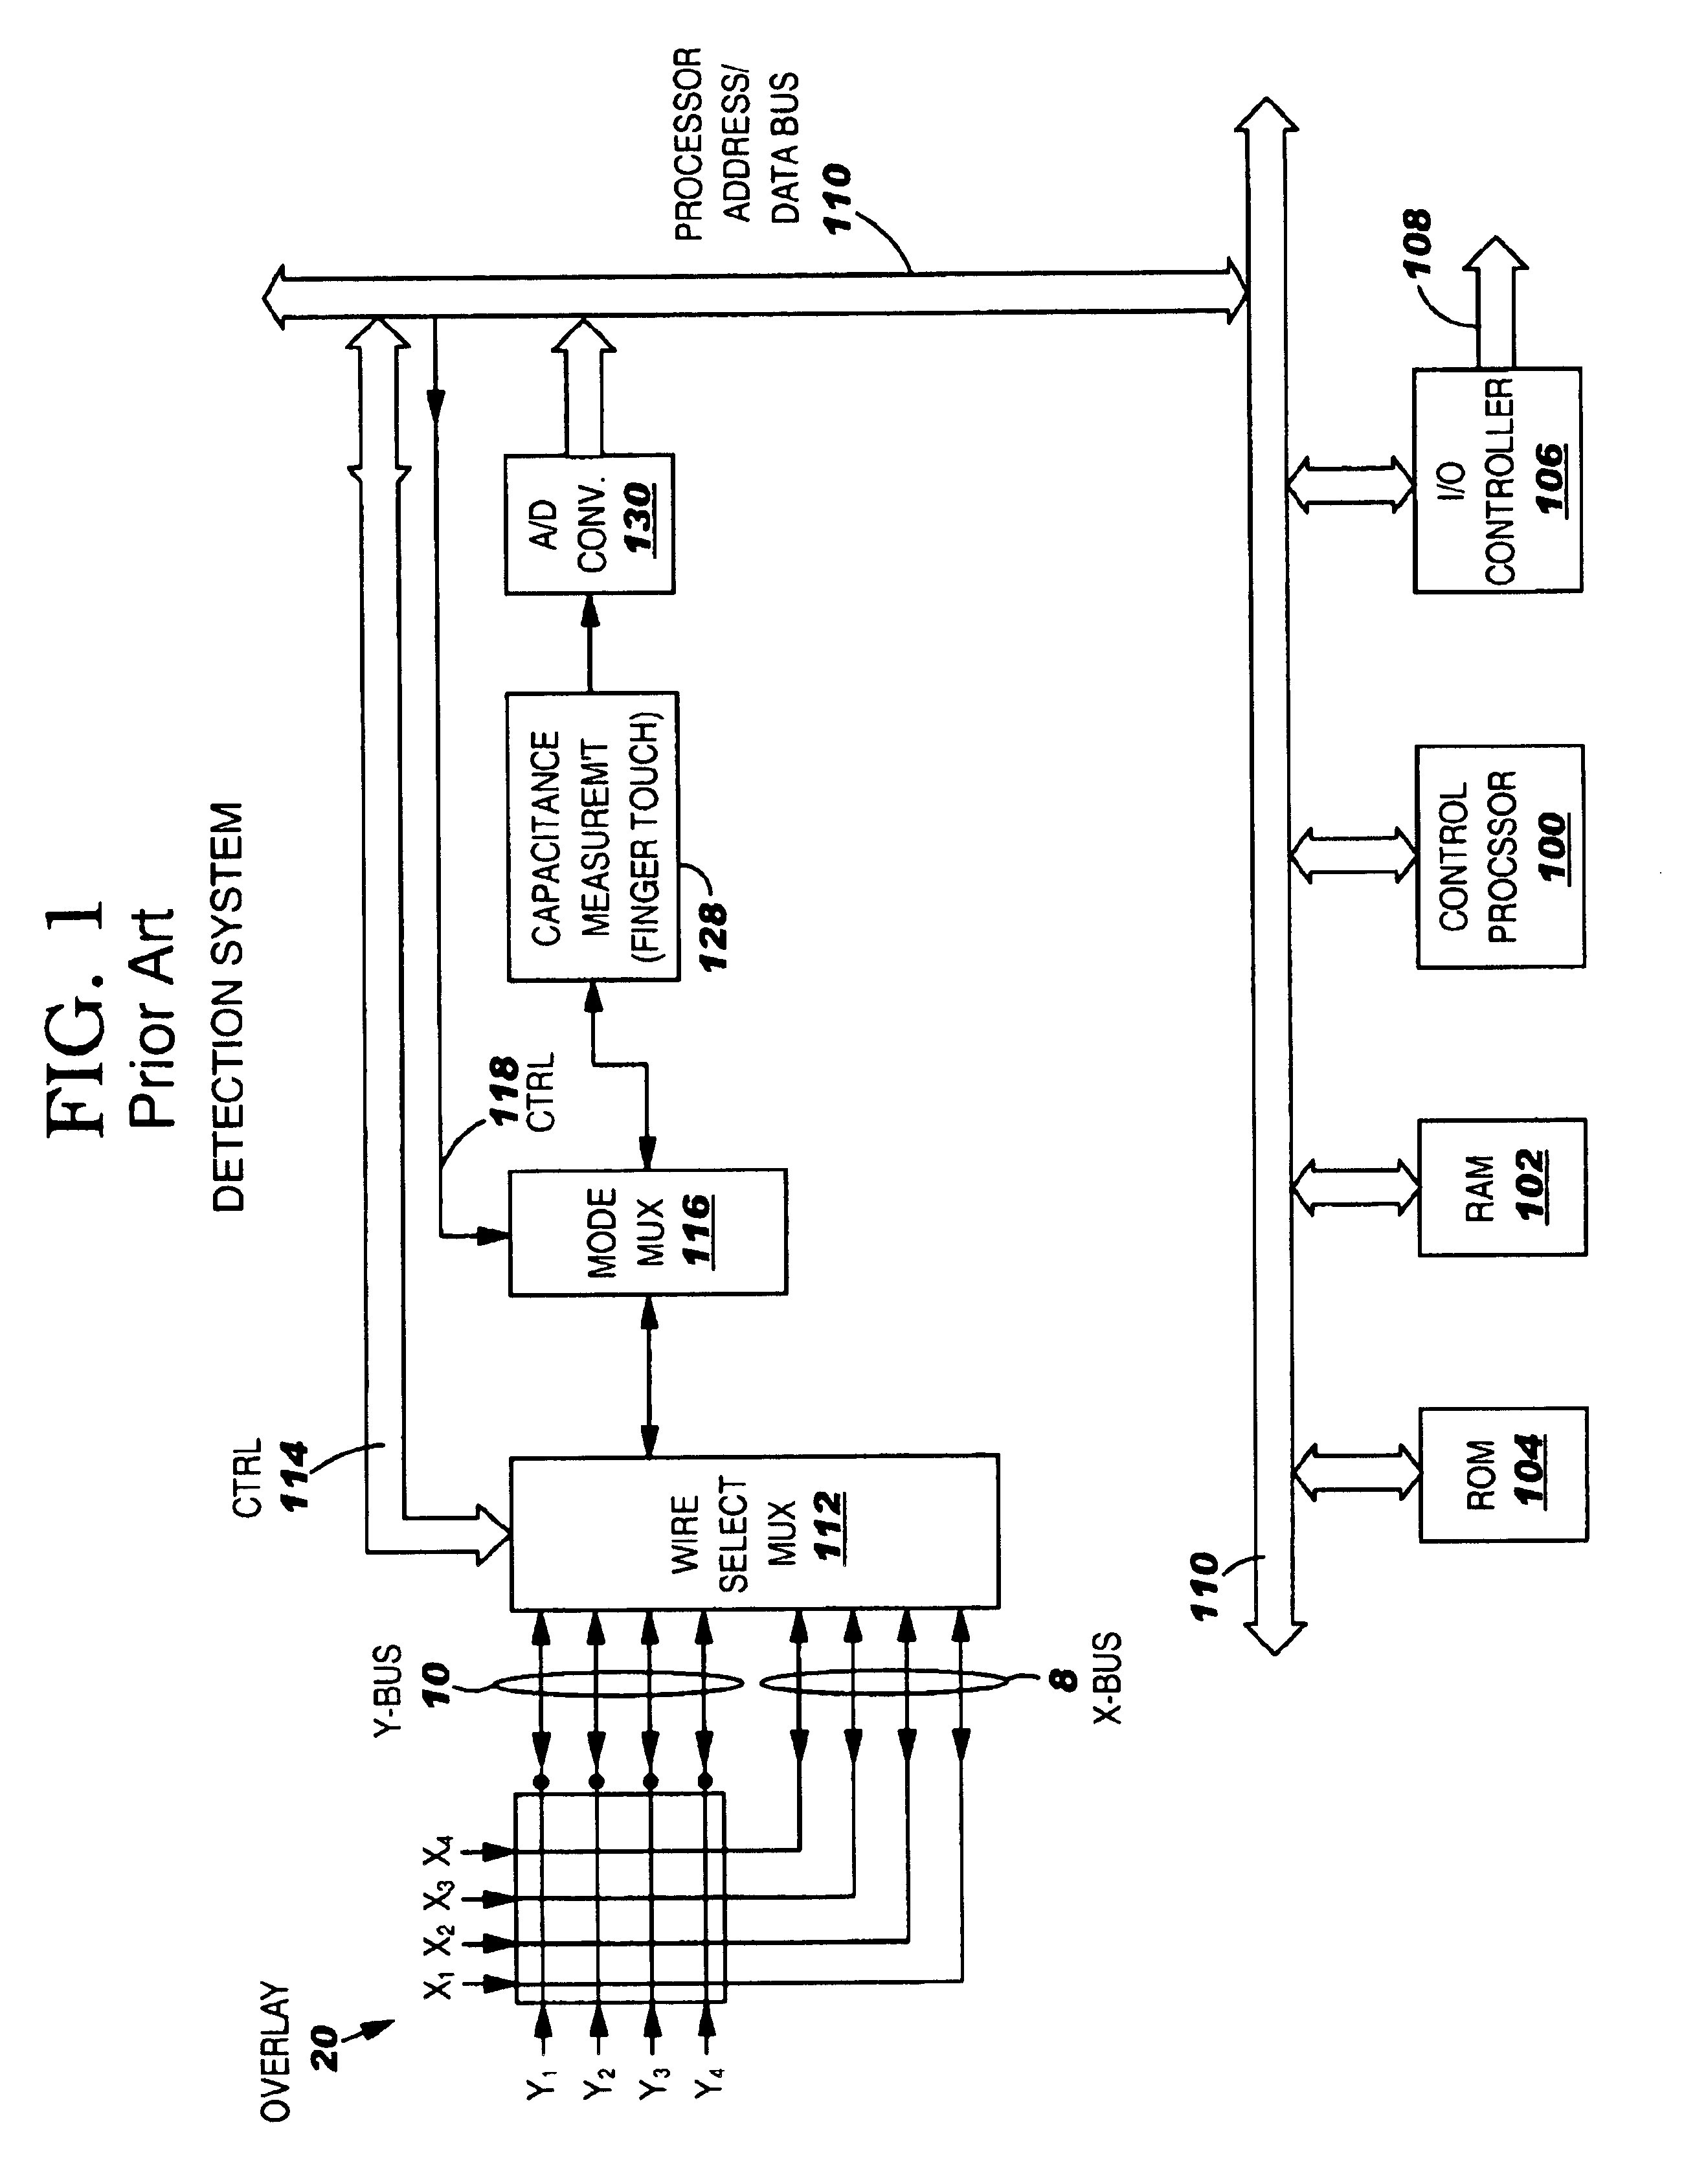 Touch sensitive apparatus and method for improved visual feedback